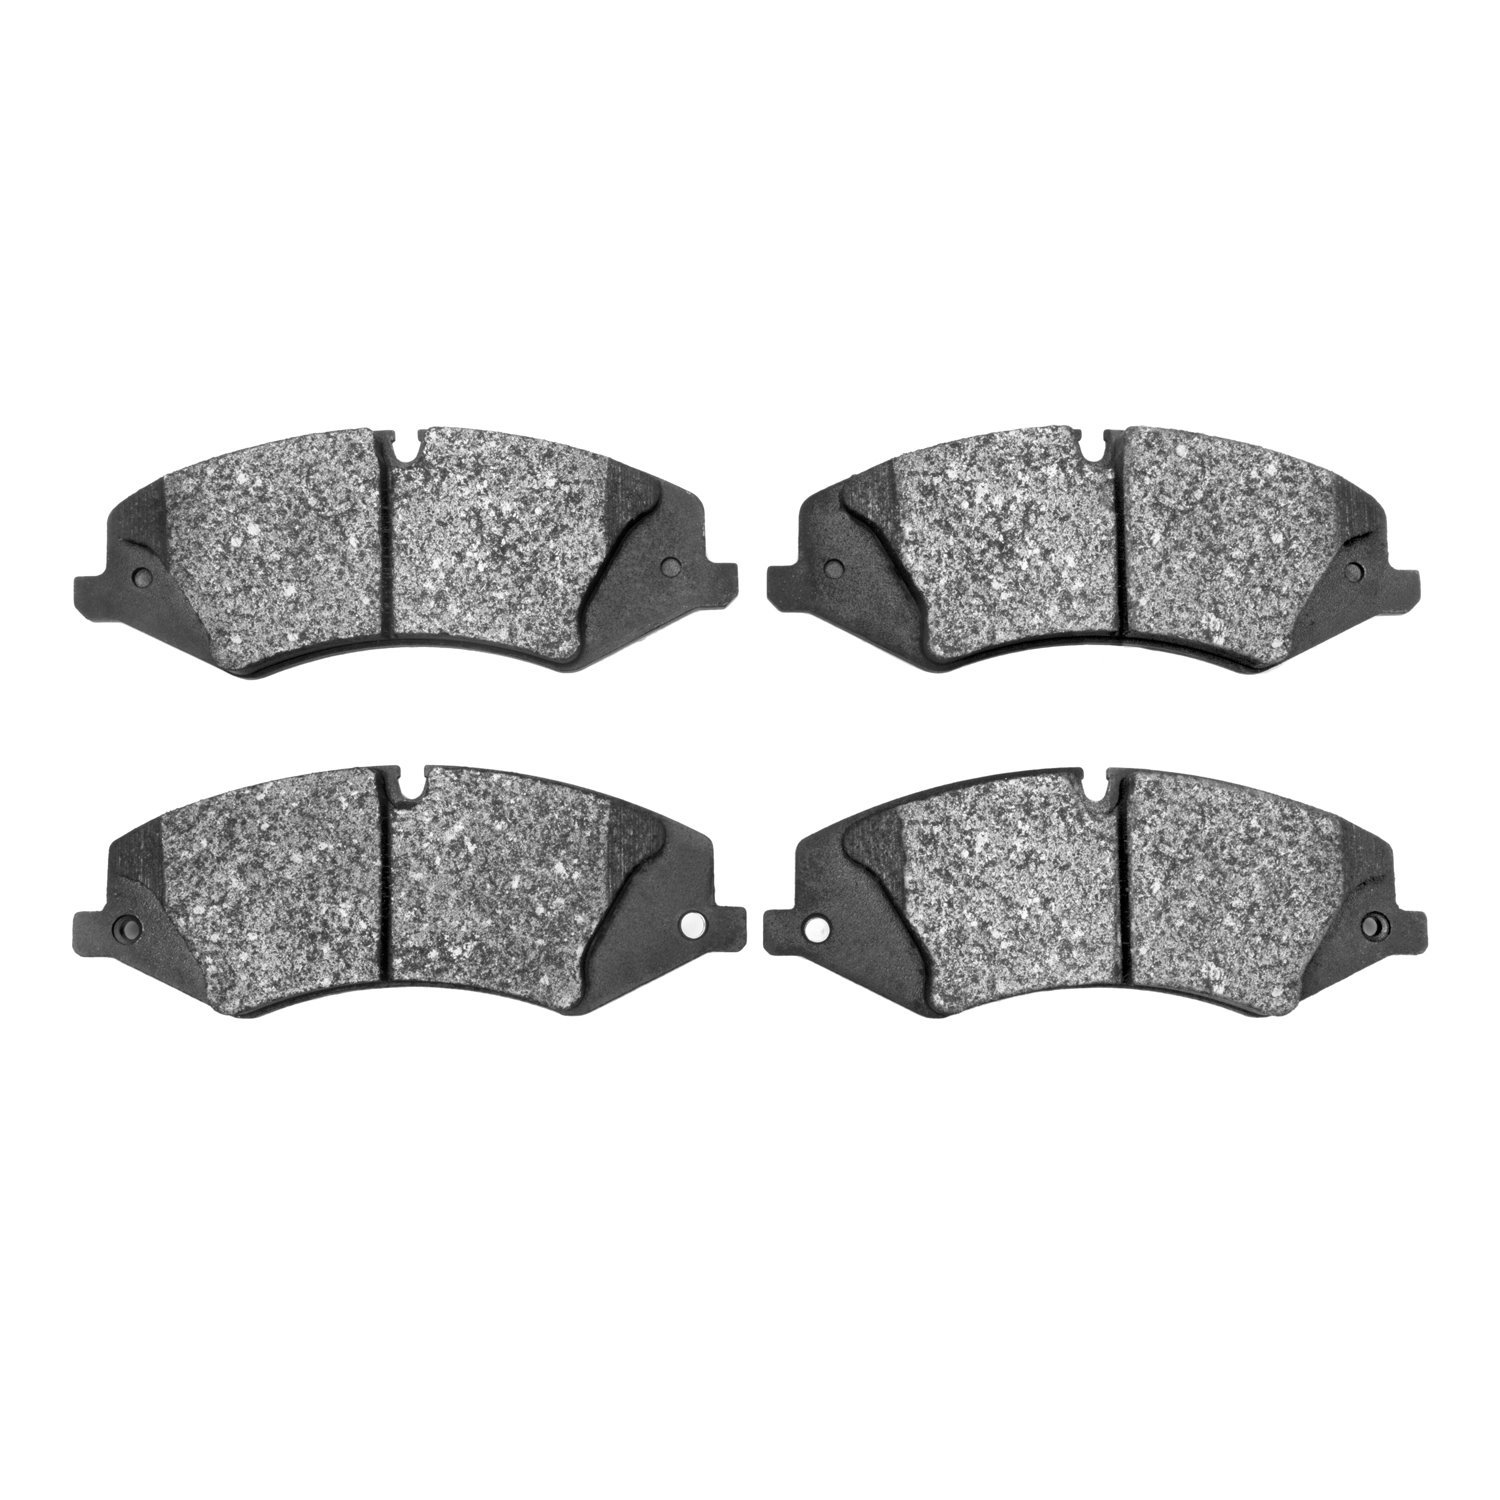 Optimum OE Brake Pads, 2010-2017 Land Rover, Position: Front